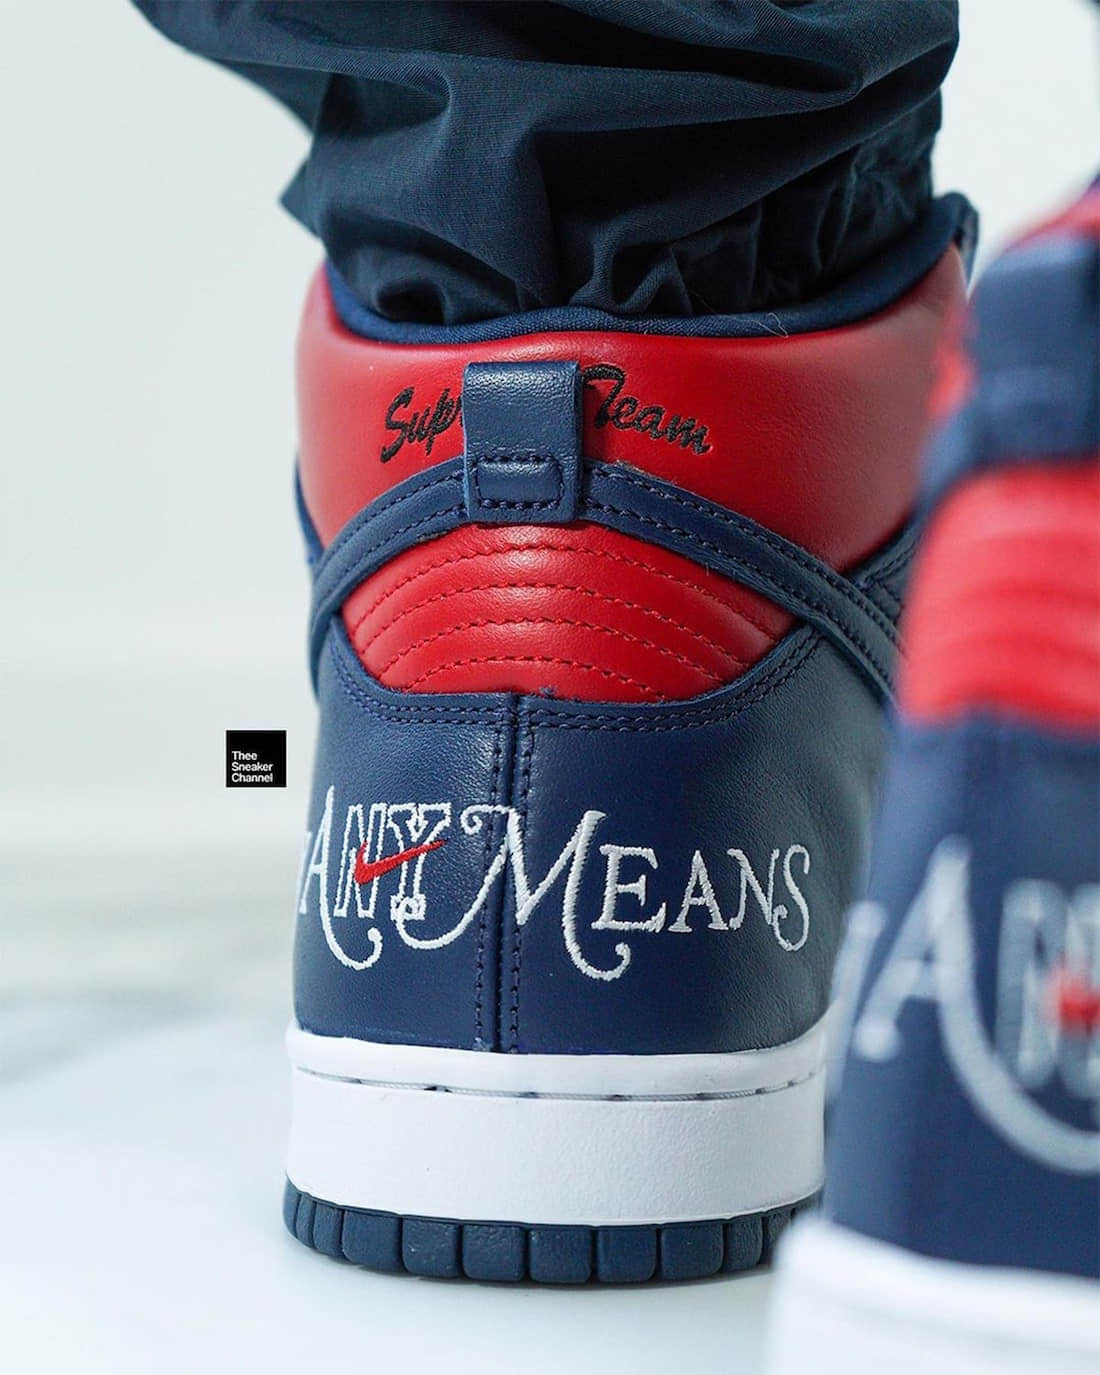 Nike Supreme x Dunk High SB 'By Any Means - Red Navy' DN3741 600 - Limited Edition